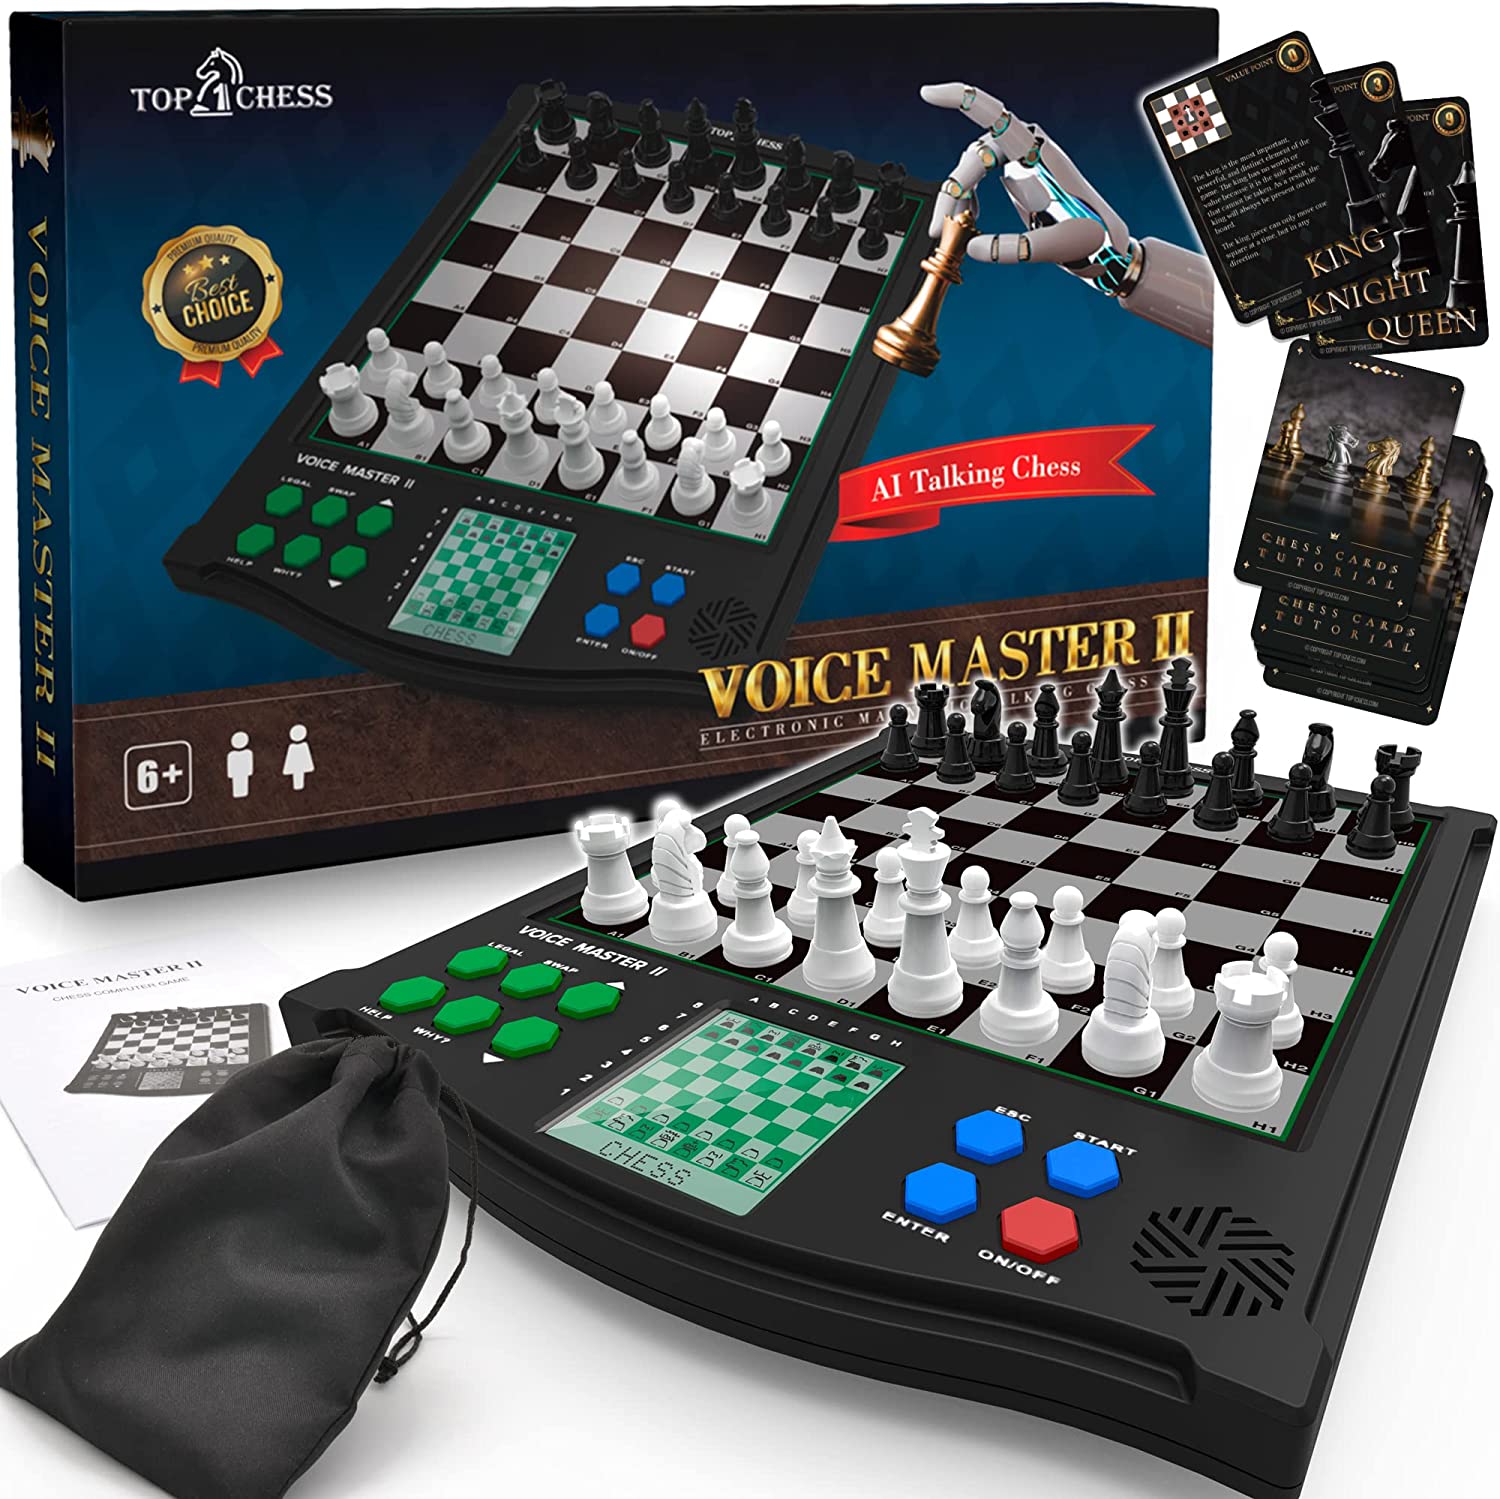 TOP 1 CHESS Classic Voice Master Electronic Chess Set